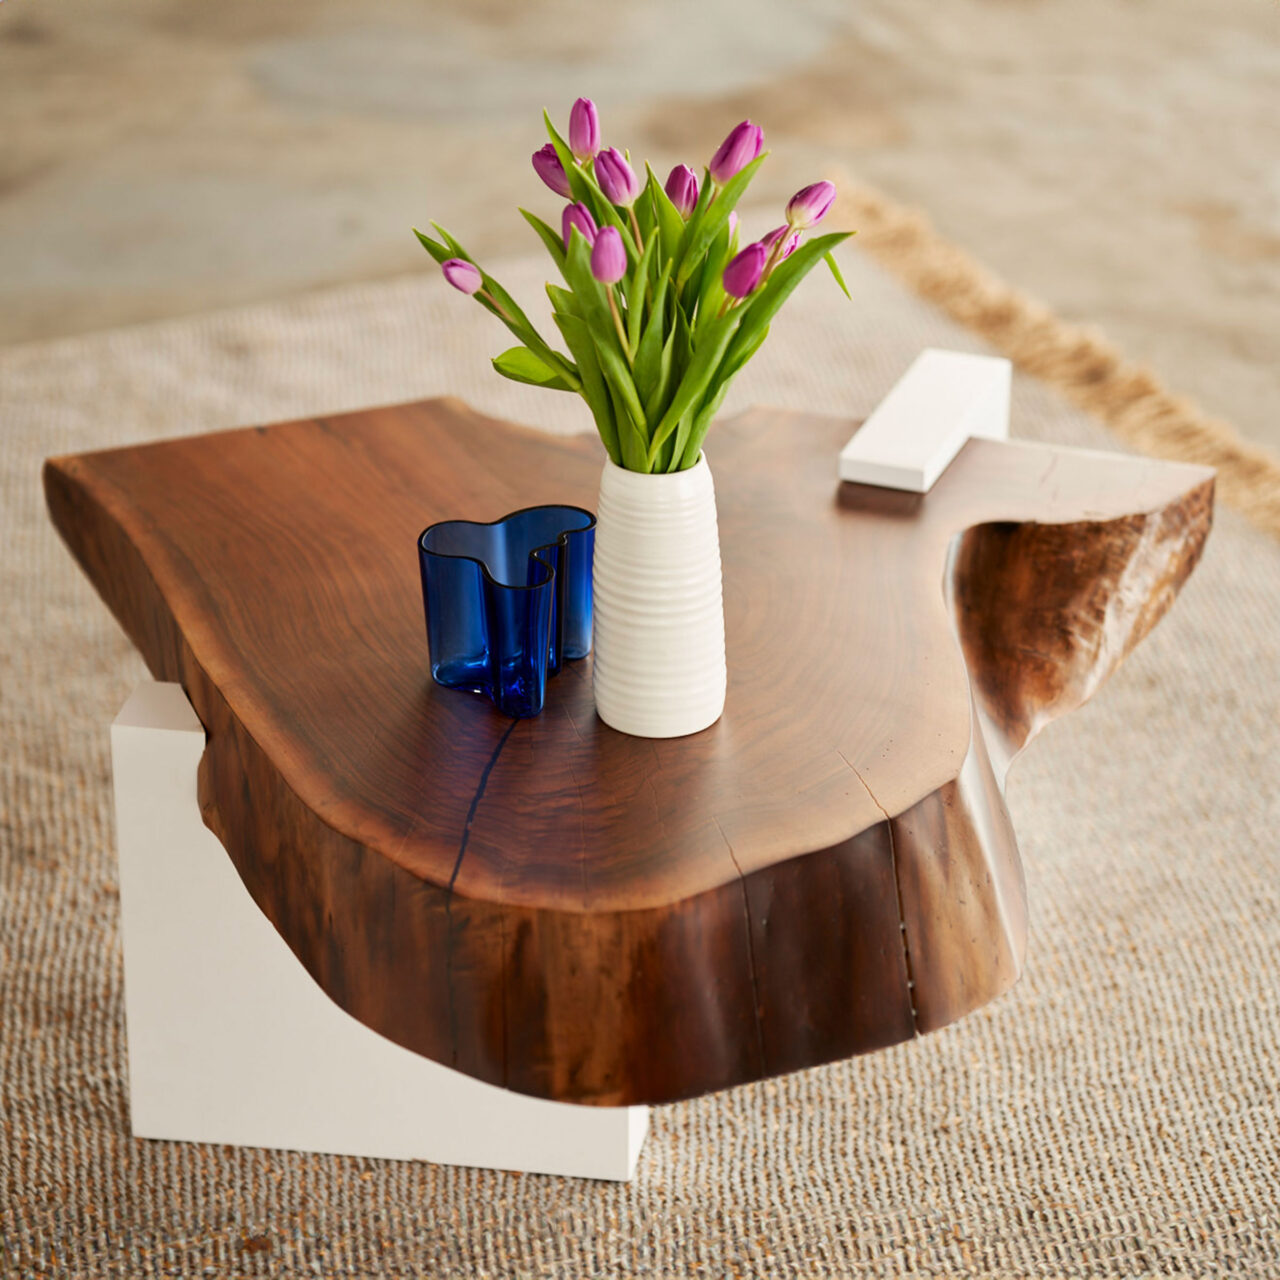 Elegant SENTIENT Furniture live-edge coffee table crafted from a single walnut slab, featuring natural contours and a minimalist white base, adorned with a vase of purple tulips.